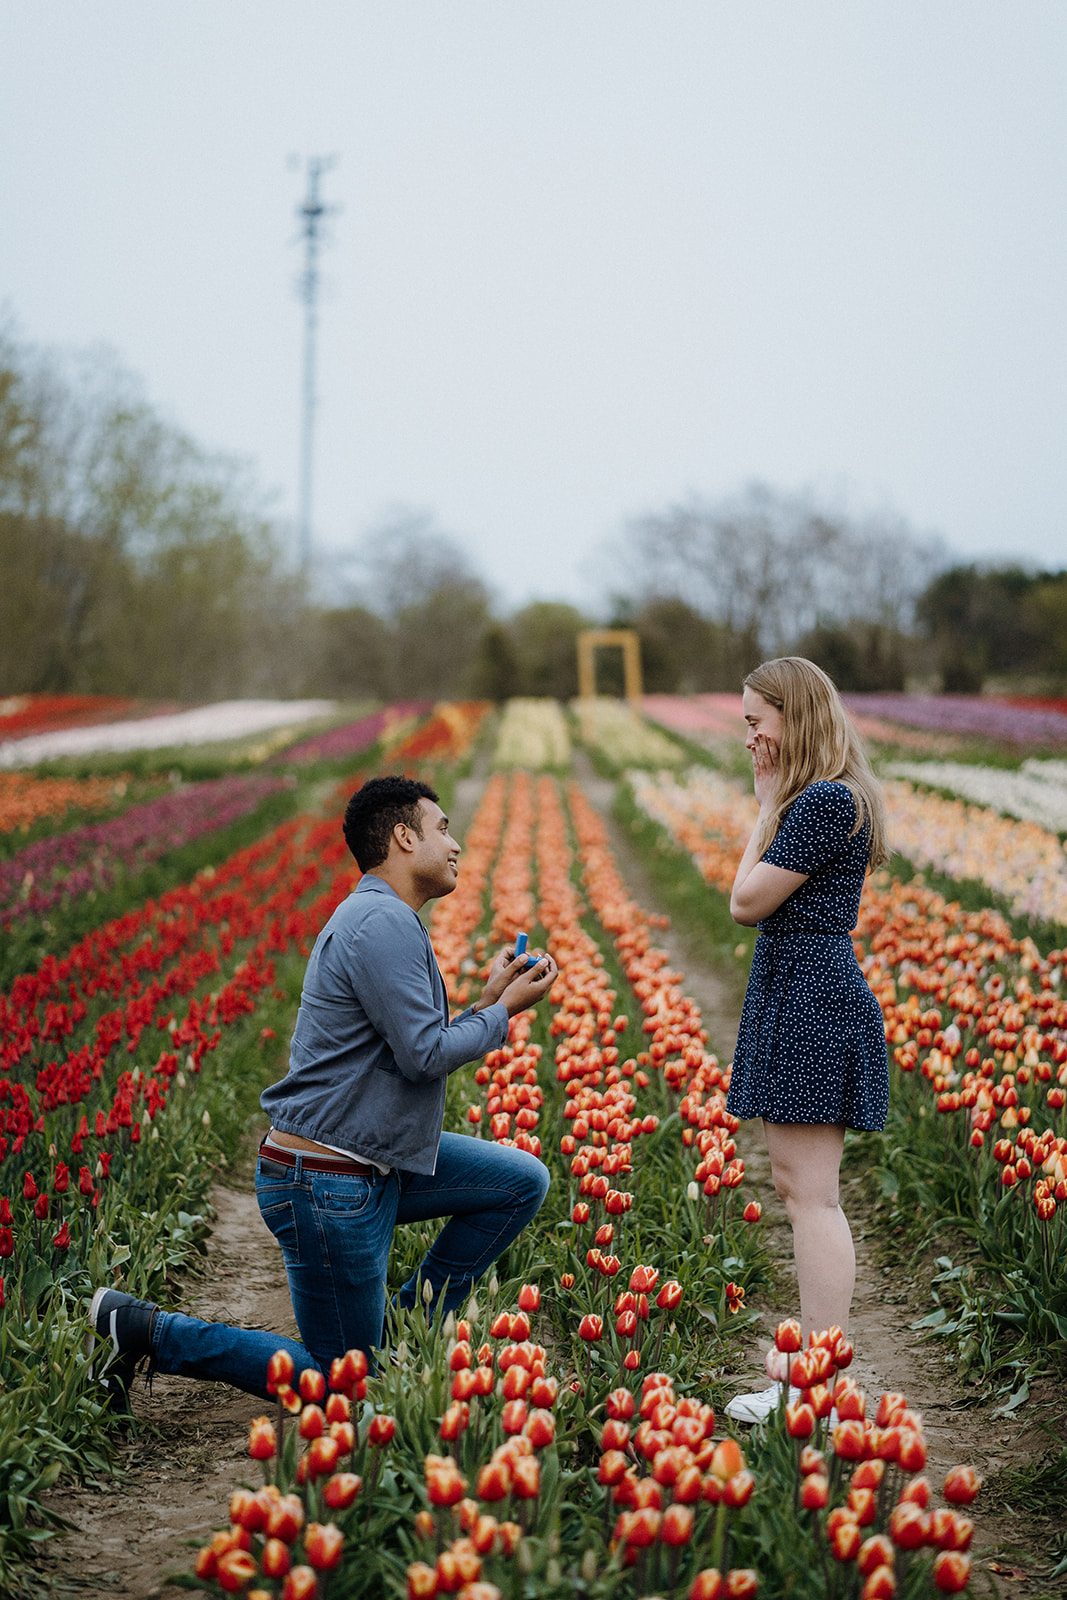 Man kneeling in tulips while his girlfriend looks at him smiling with her hands on her cheeks.